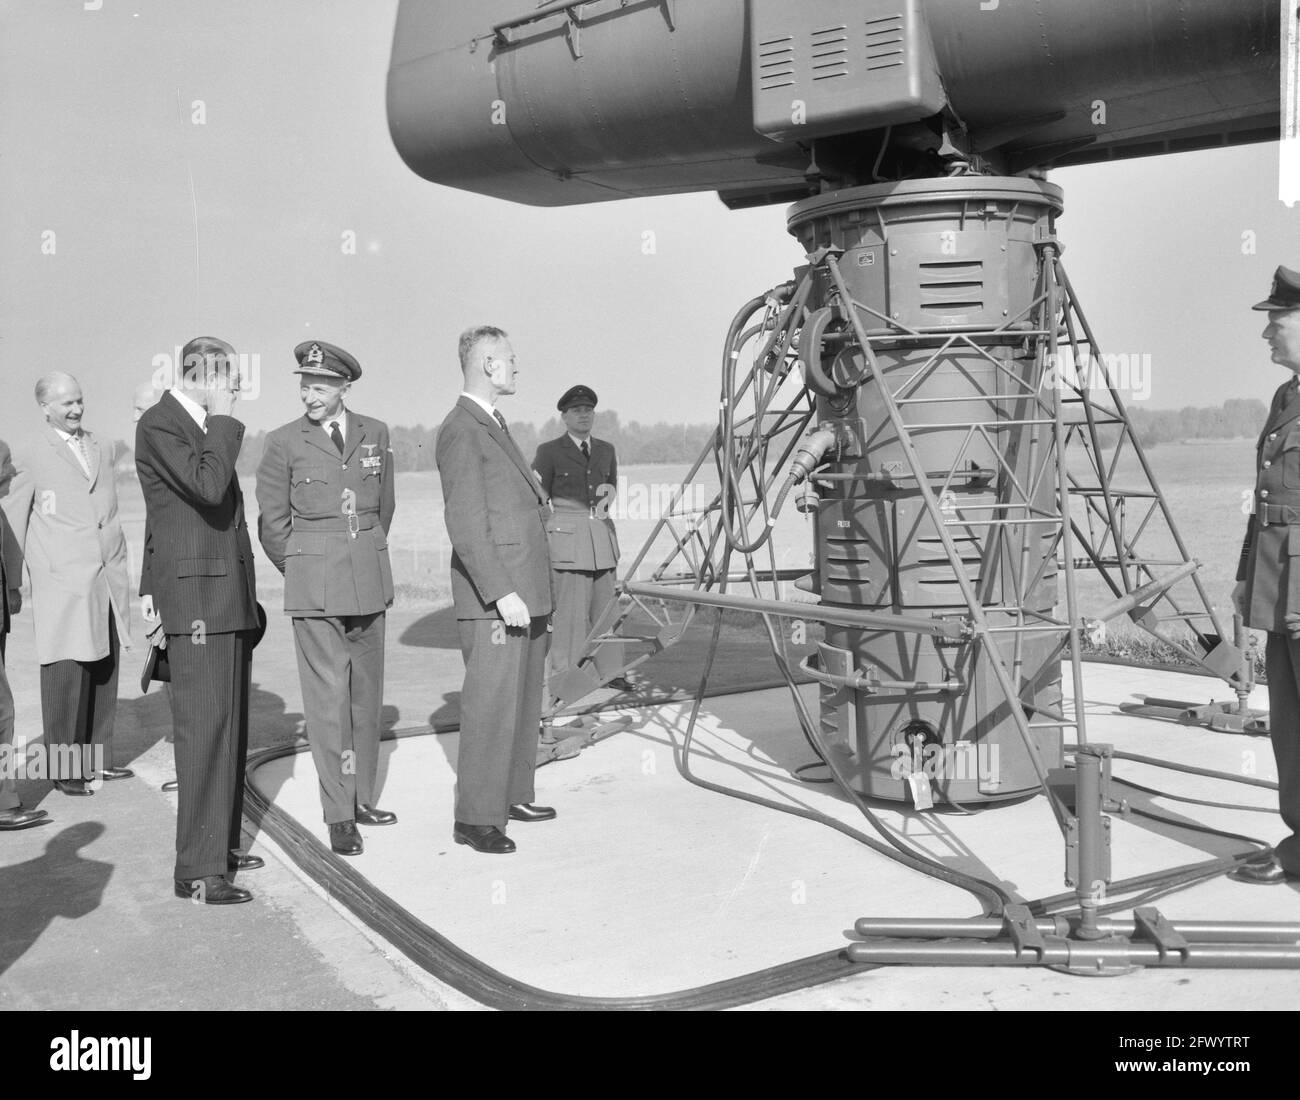 Transfer of missile launching site in Germany. General H. Schaper, Calmeyer at radar. This is the first NIKE Hercules Ant-Aircraft Guided Missile site of 1 Group Guided Missiles near Handorf., October 10, 1961, Transfers, launch sites, radars, missiles, The Netherlands, 20th century press agency photo, news to remember, documentary, historic photography 1945-1990, visual stories, human history of the Twentieth Century, capturing moments in time Stock Photo